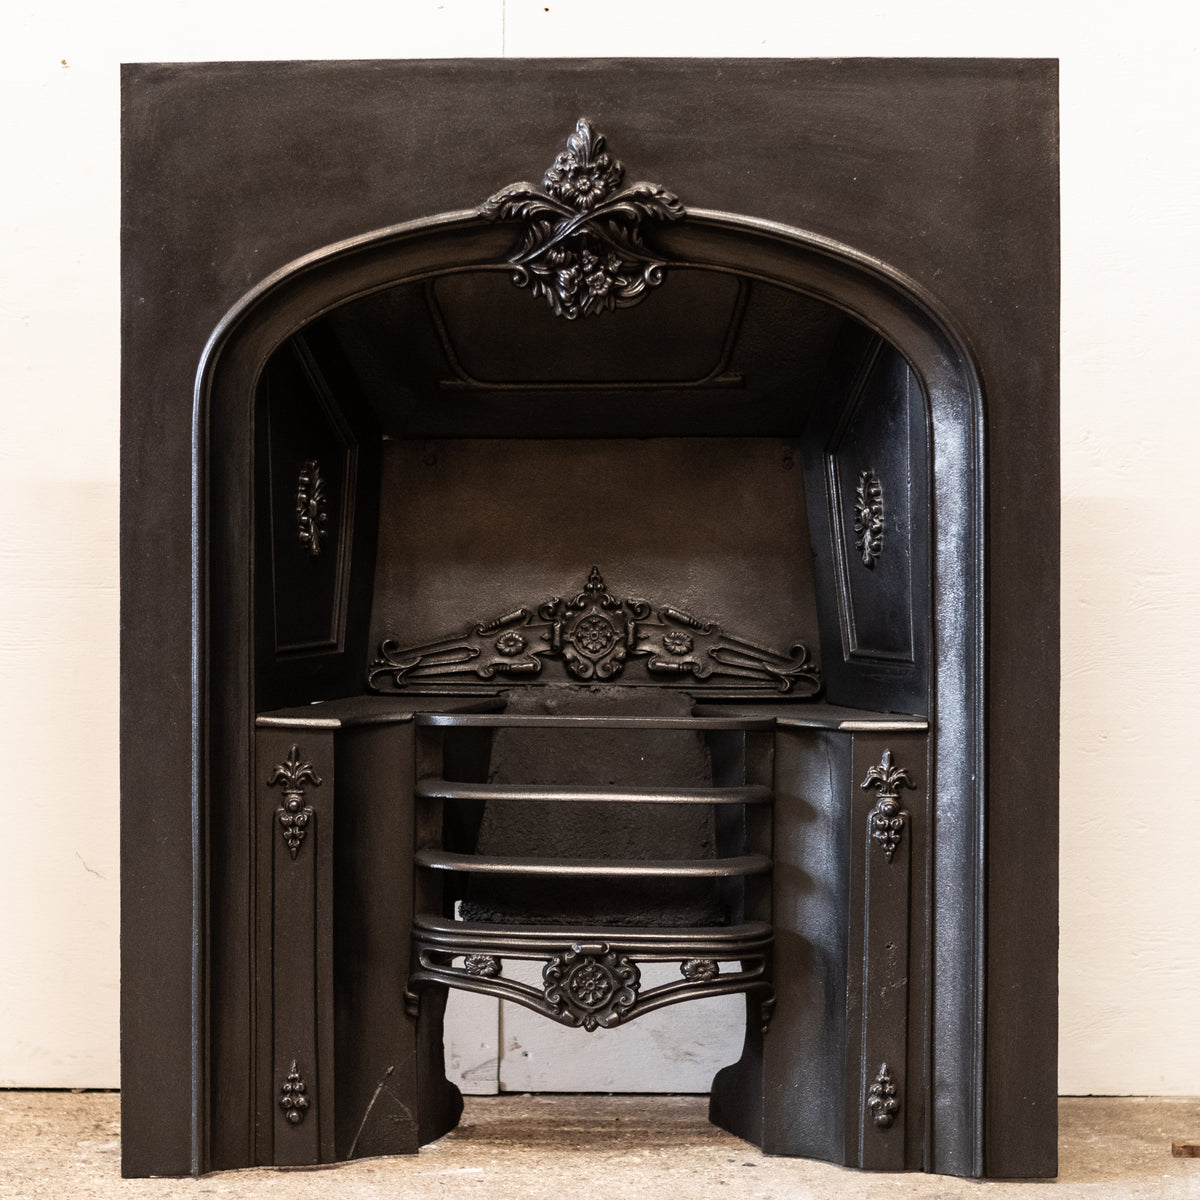 Antique Ornate Early Victorian Cast Iron Fireplace Insert | The Architectural Forum